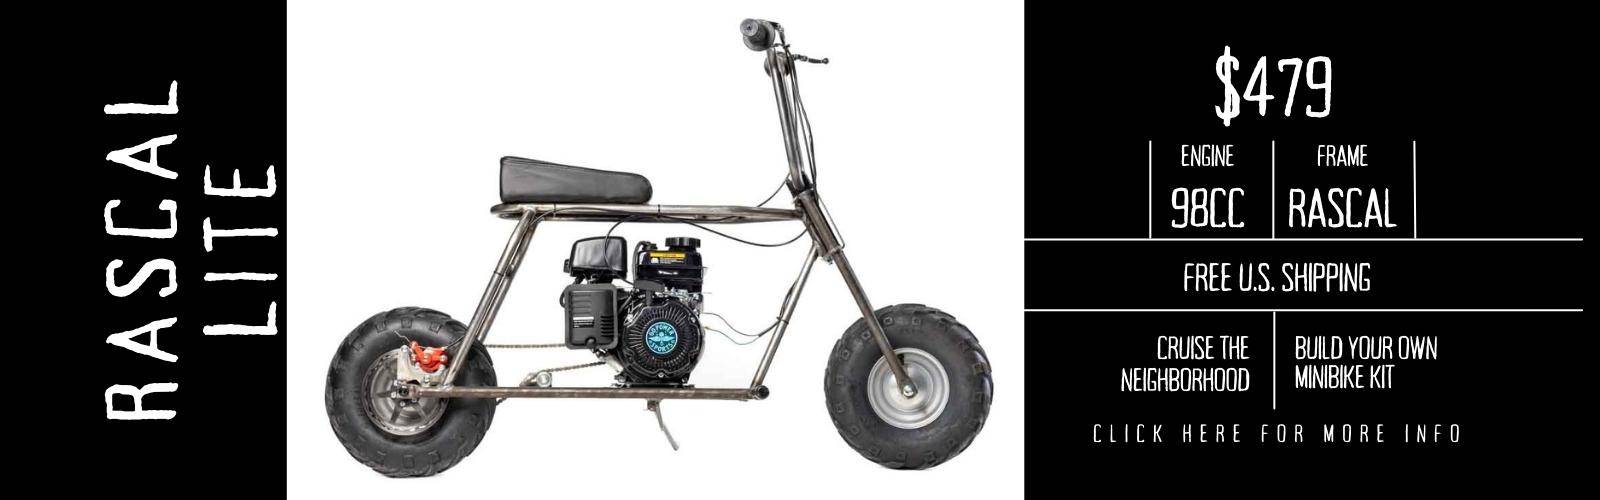 Rascal Lite Minibike Kit is now only $497 with Free U.S. Shipping